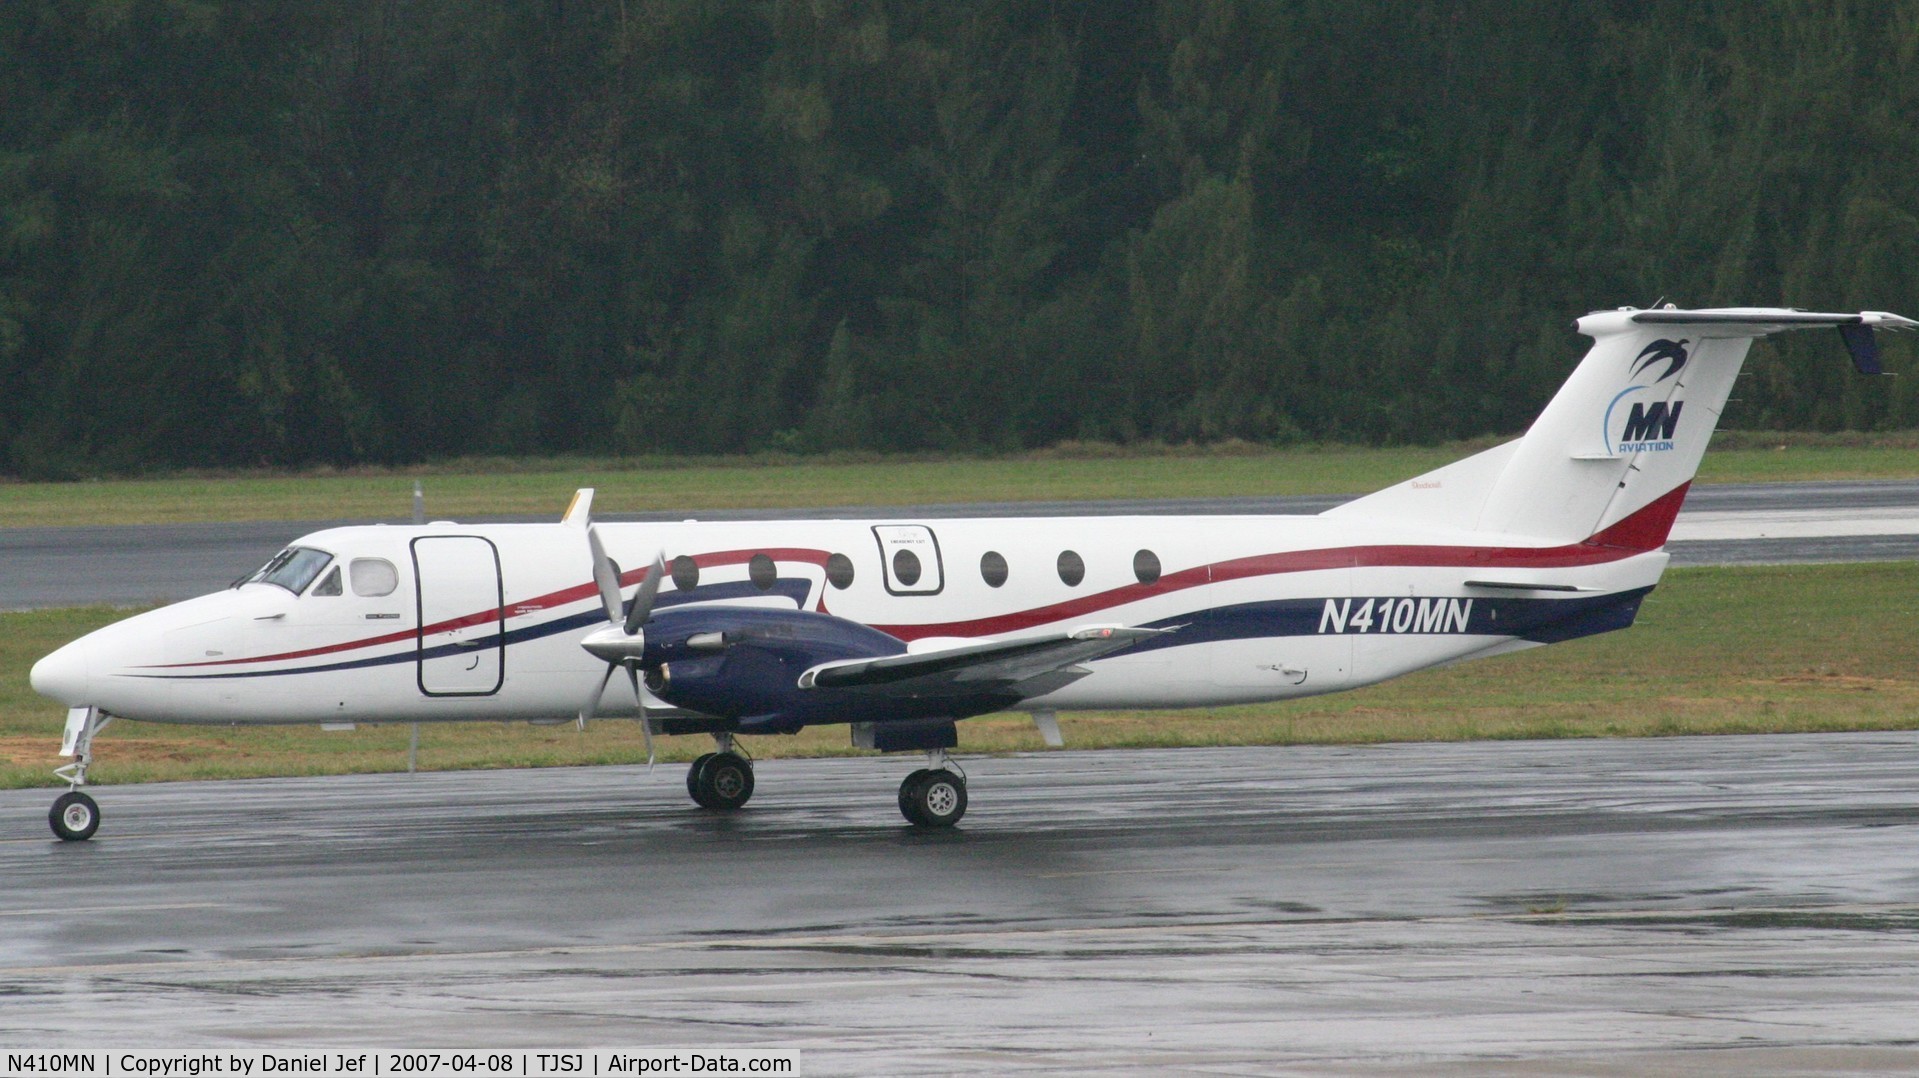 N410MN, 1991 Beech 1900C C/N UC-167, N410mn Taxing to the active runway for take off